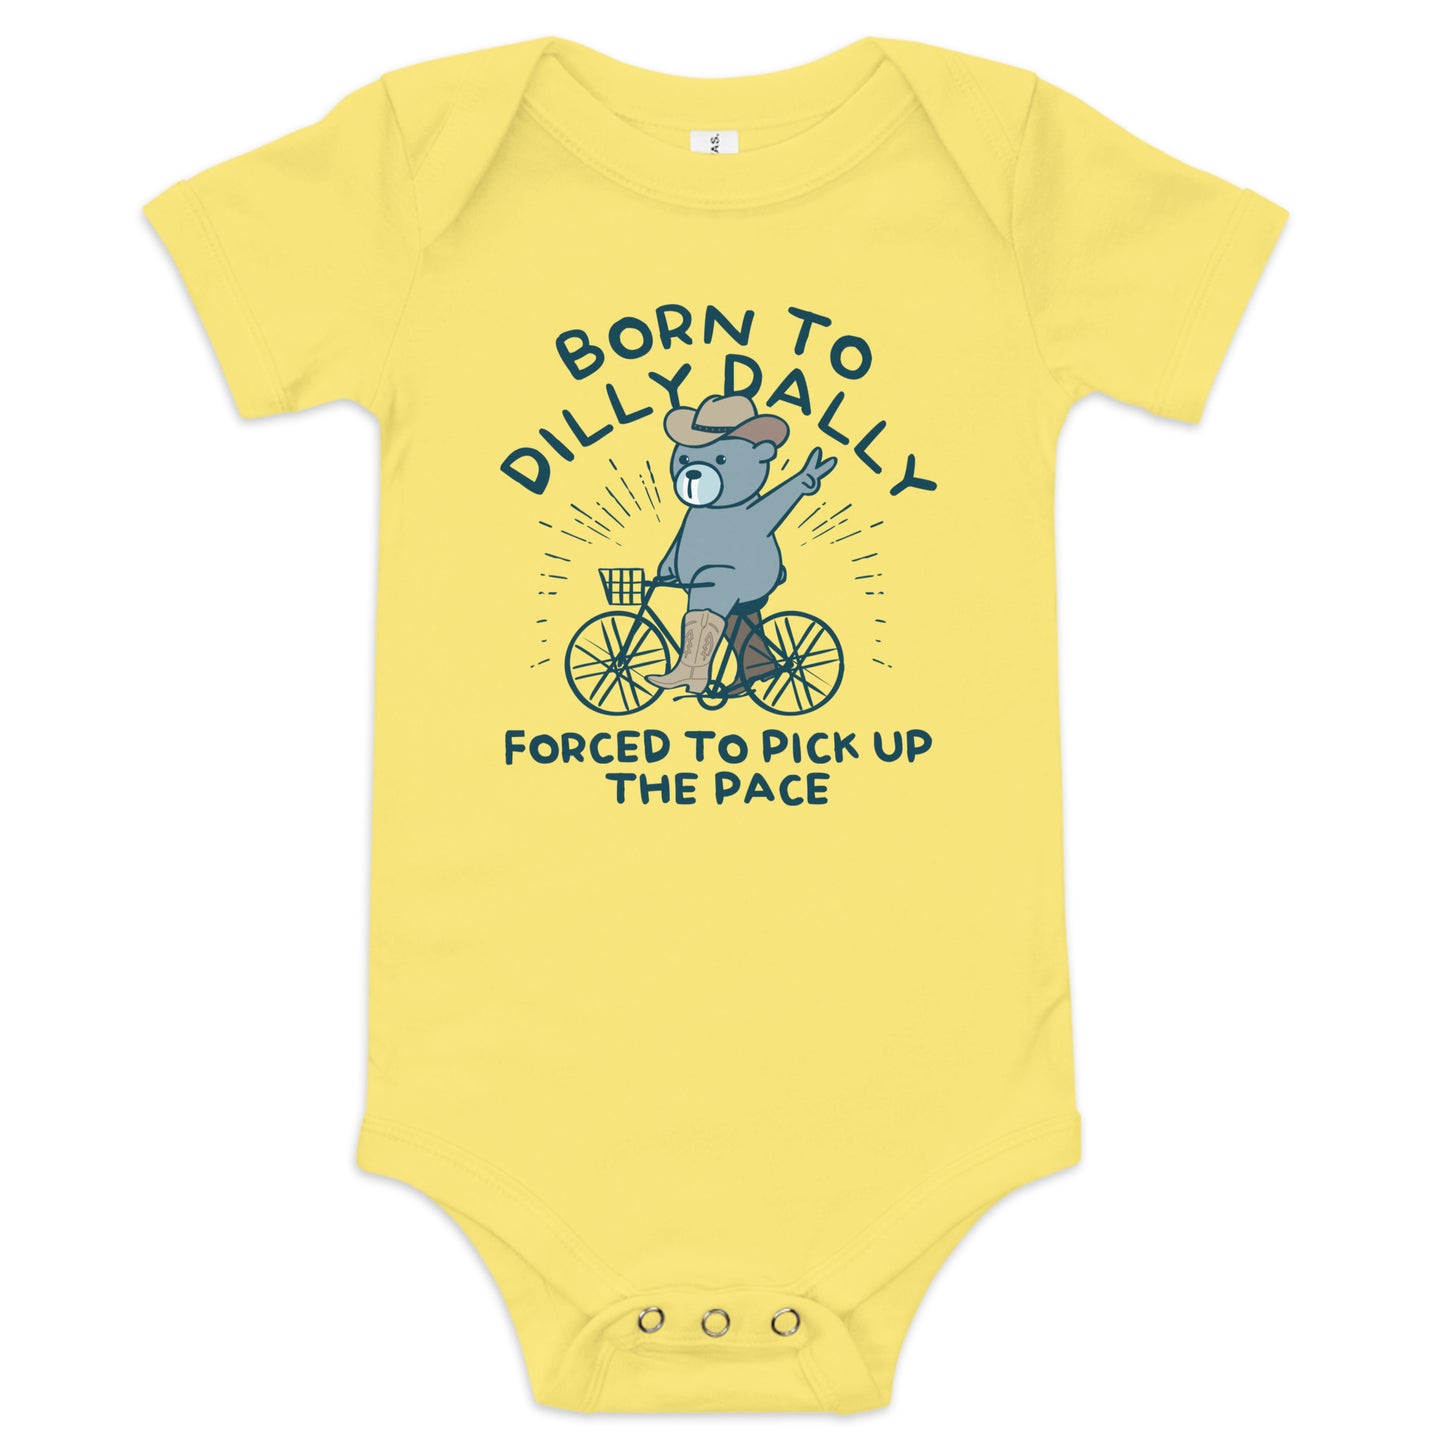 Born To Dilly Dally Forced To Pick Up The Pace Kid's Onesie